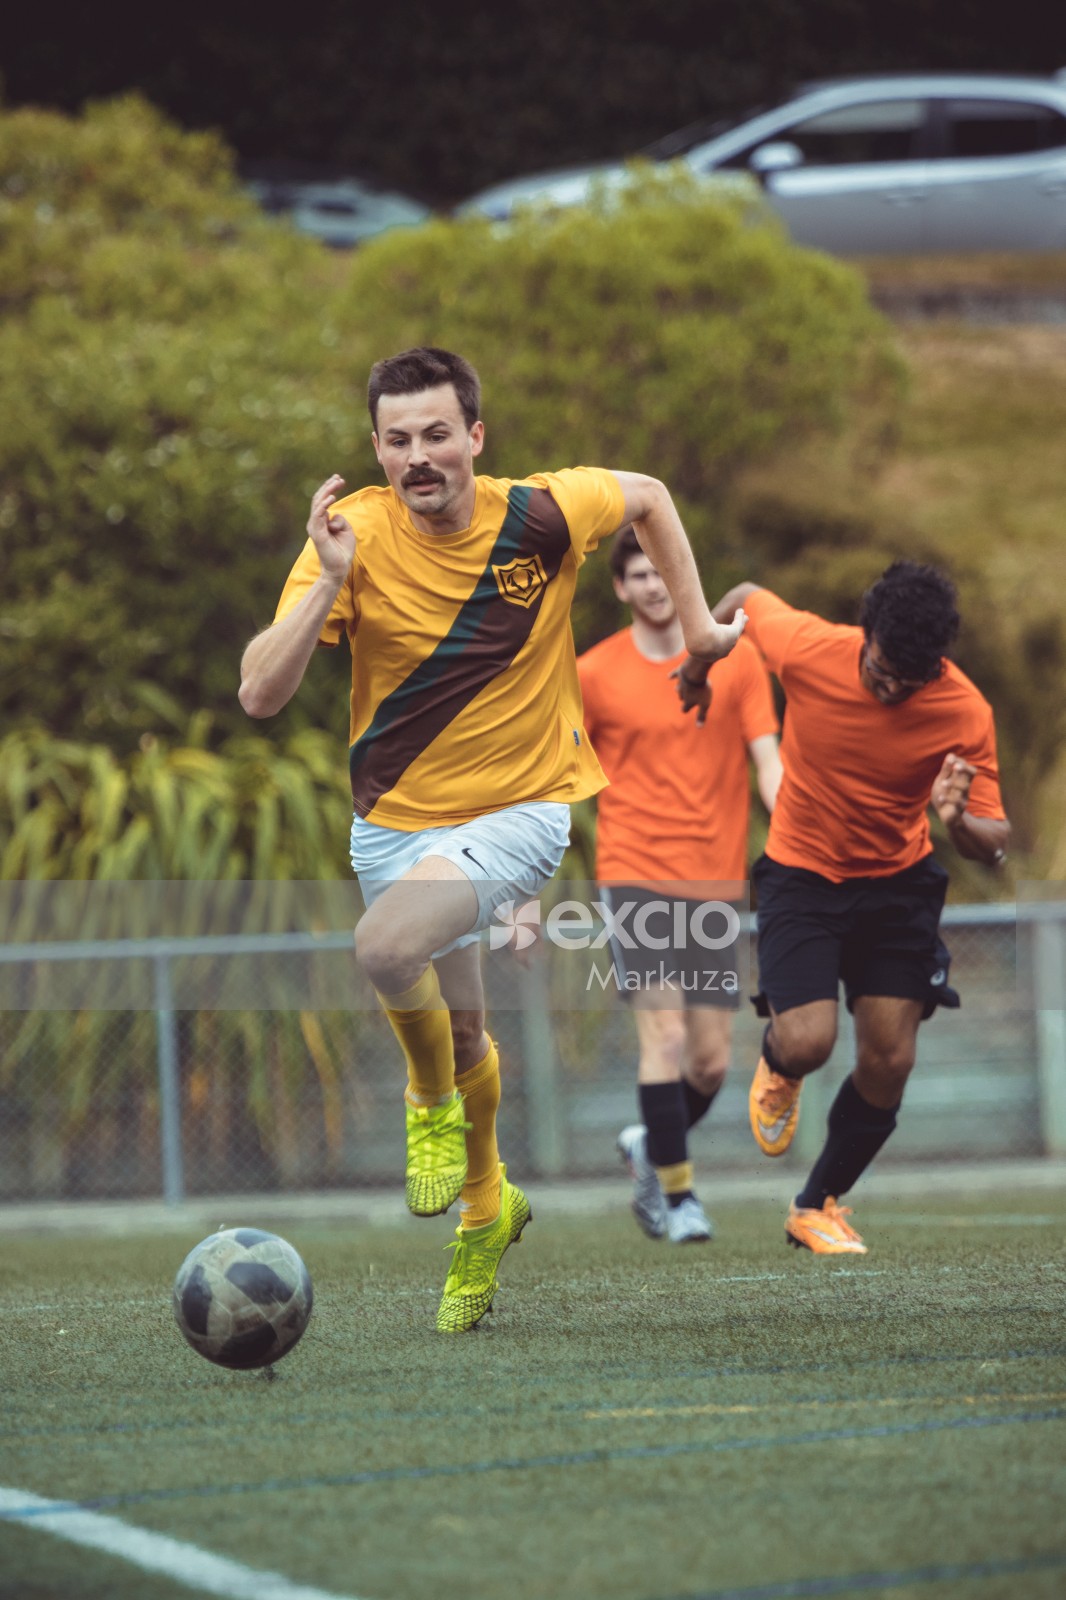 Player sprinting after a bouncing football - Sports Zone sunday league